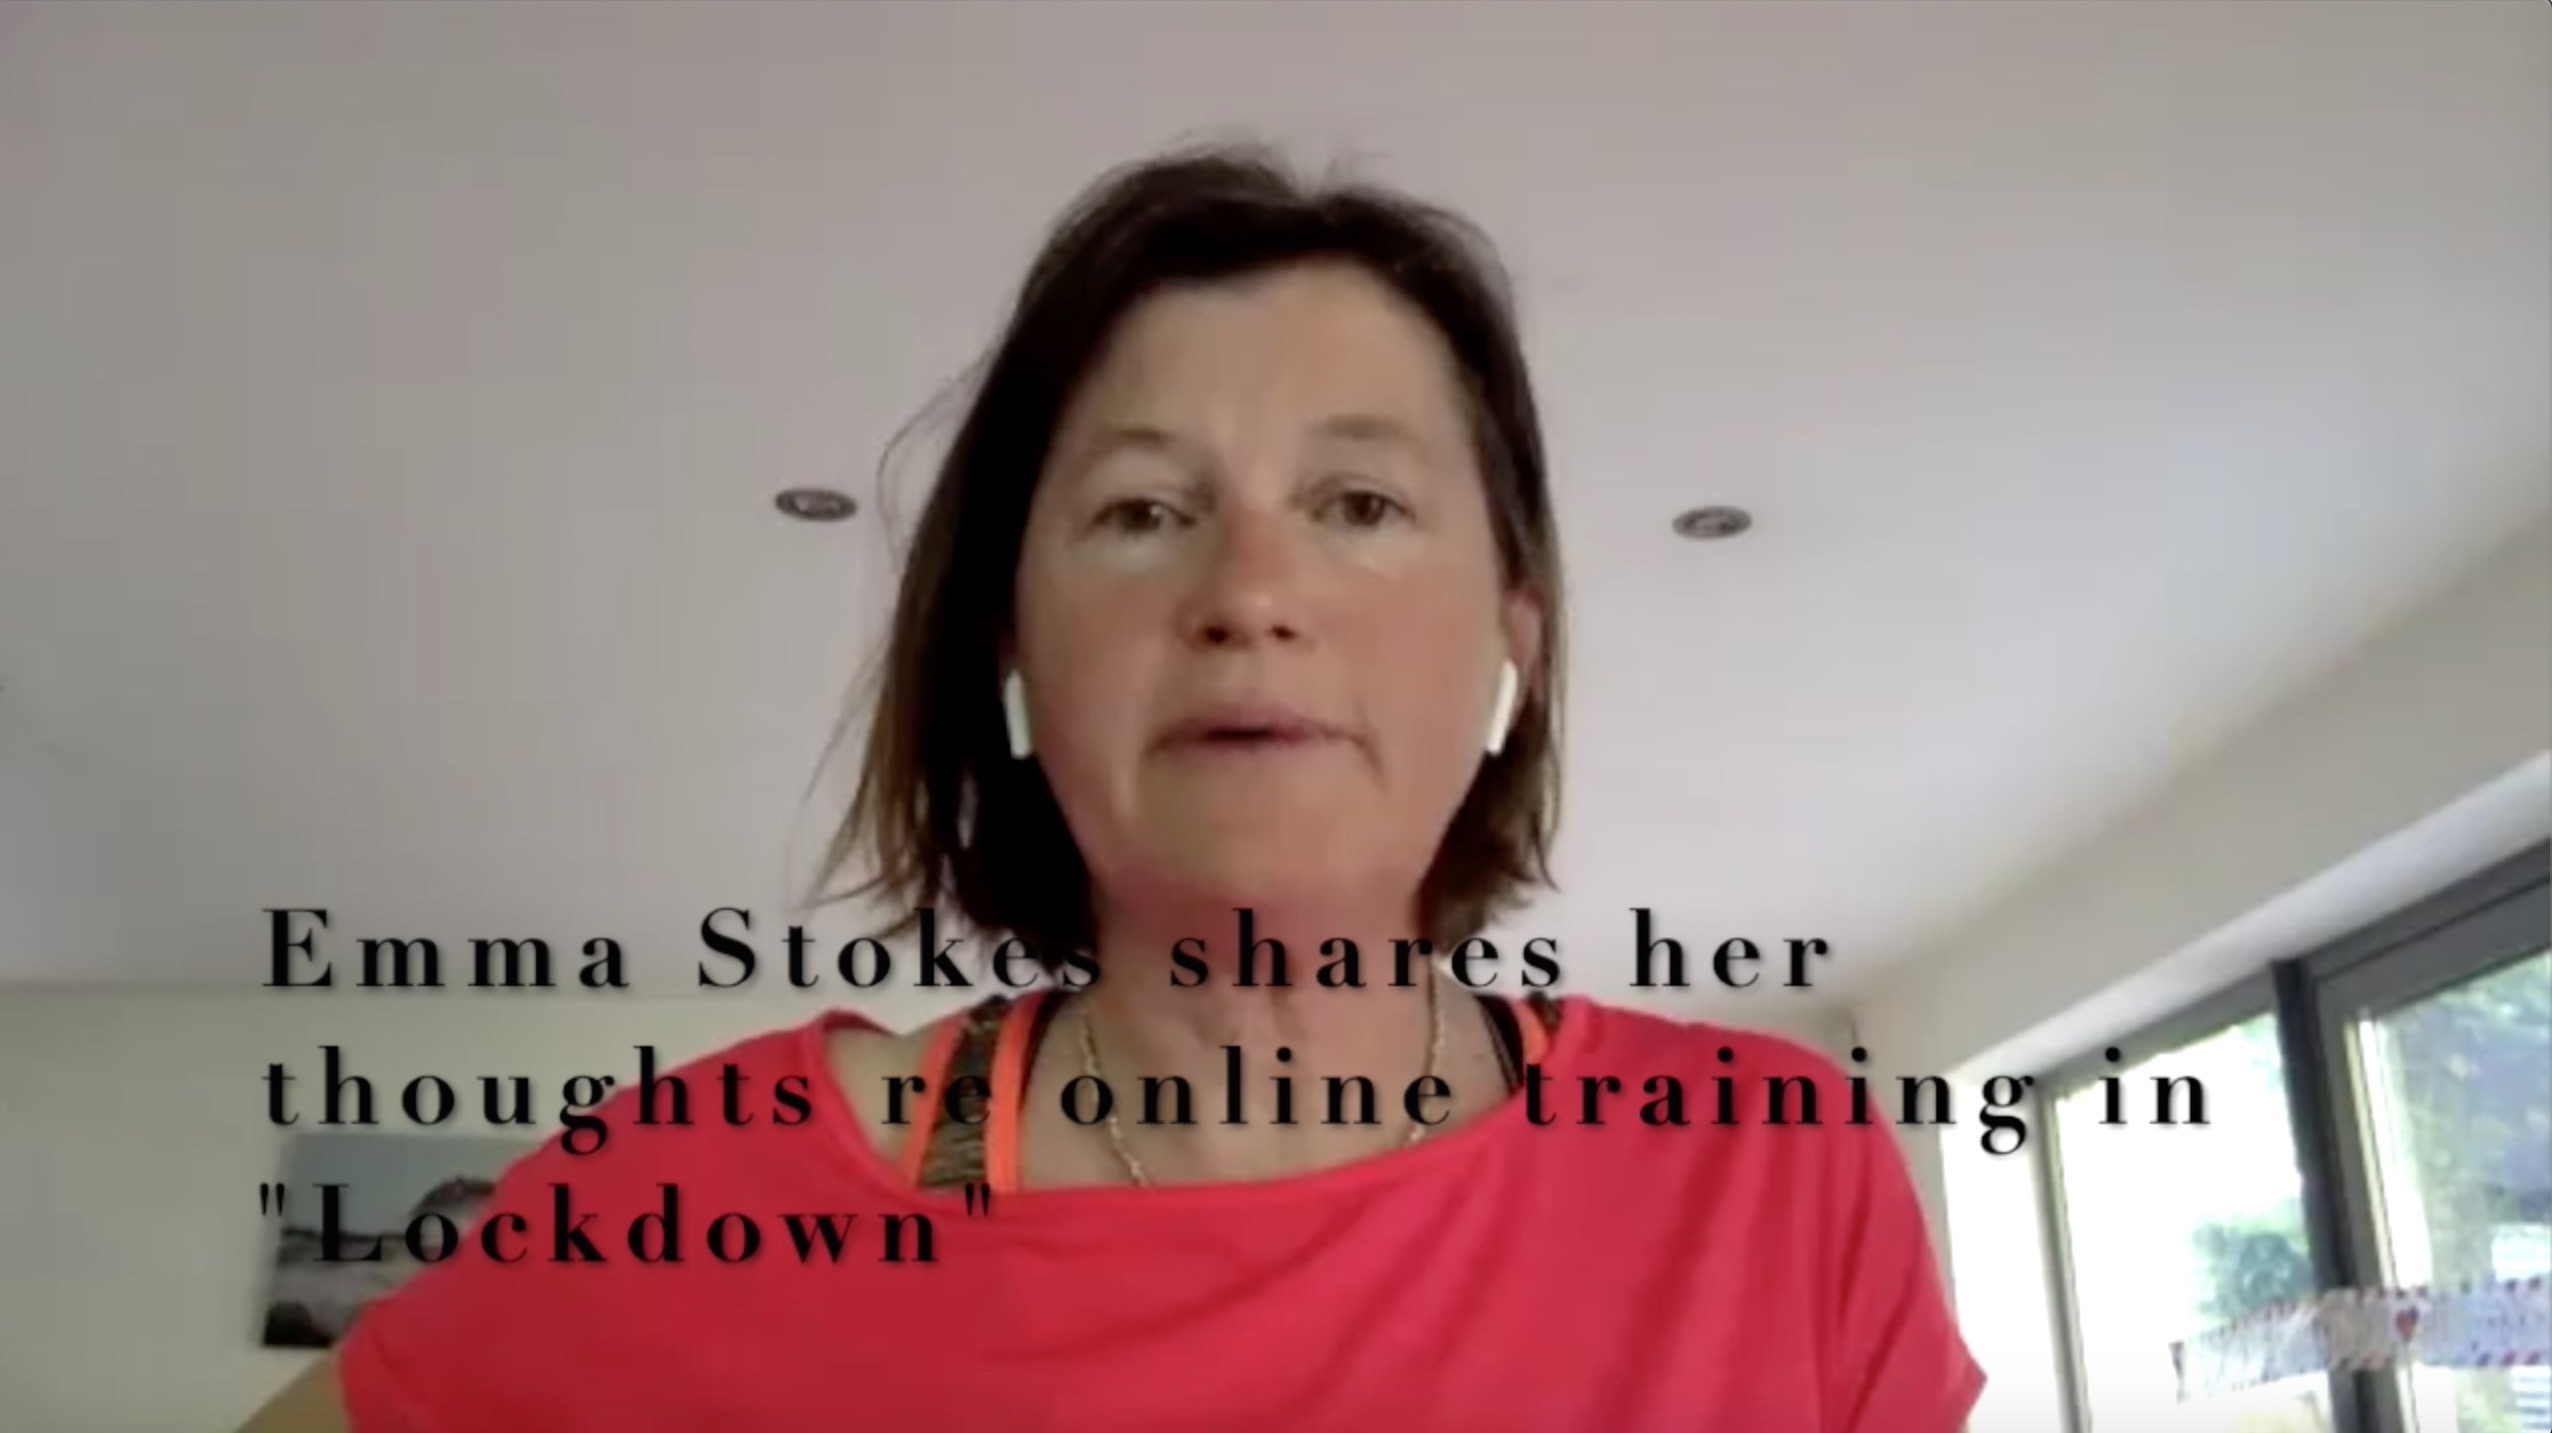 Online training gives a totally different offering, no time driving, parking, changing. You are straight out of life at home and into your exercise.